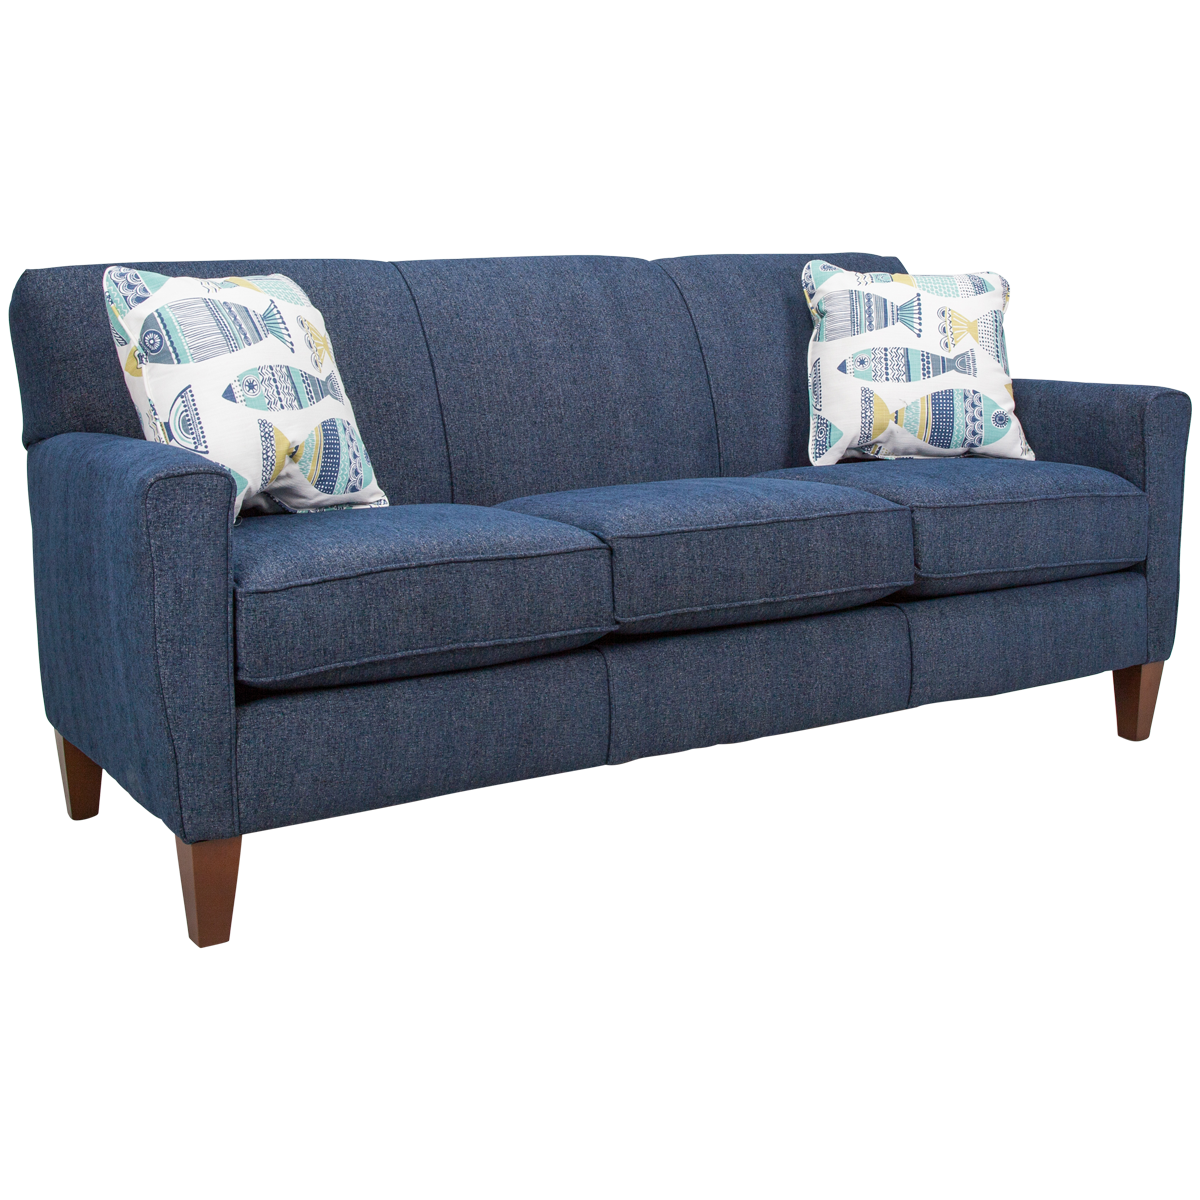 Collegedale Sofa W/frame Coilengland | Babette's Furniture & Home With Navy Linen Coil Sofas (View 19 of 20)